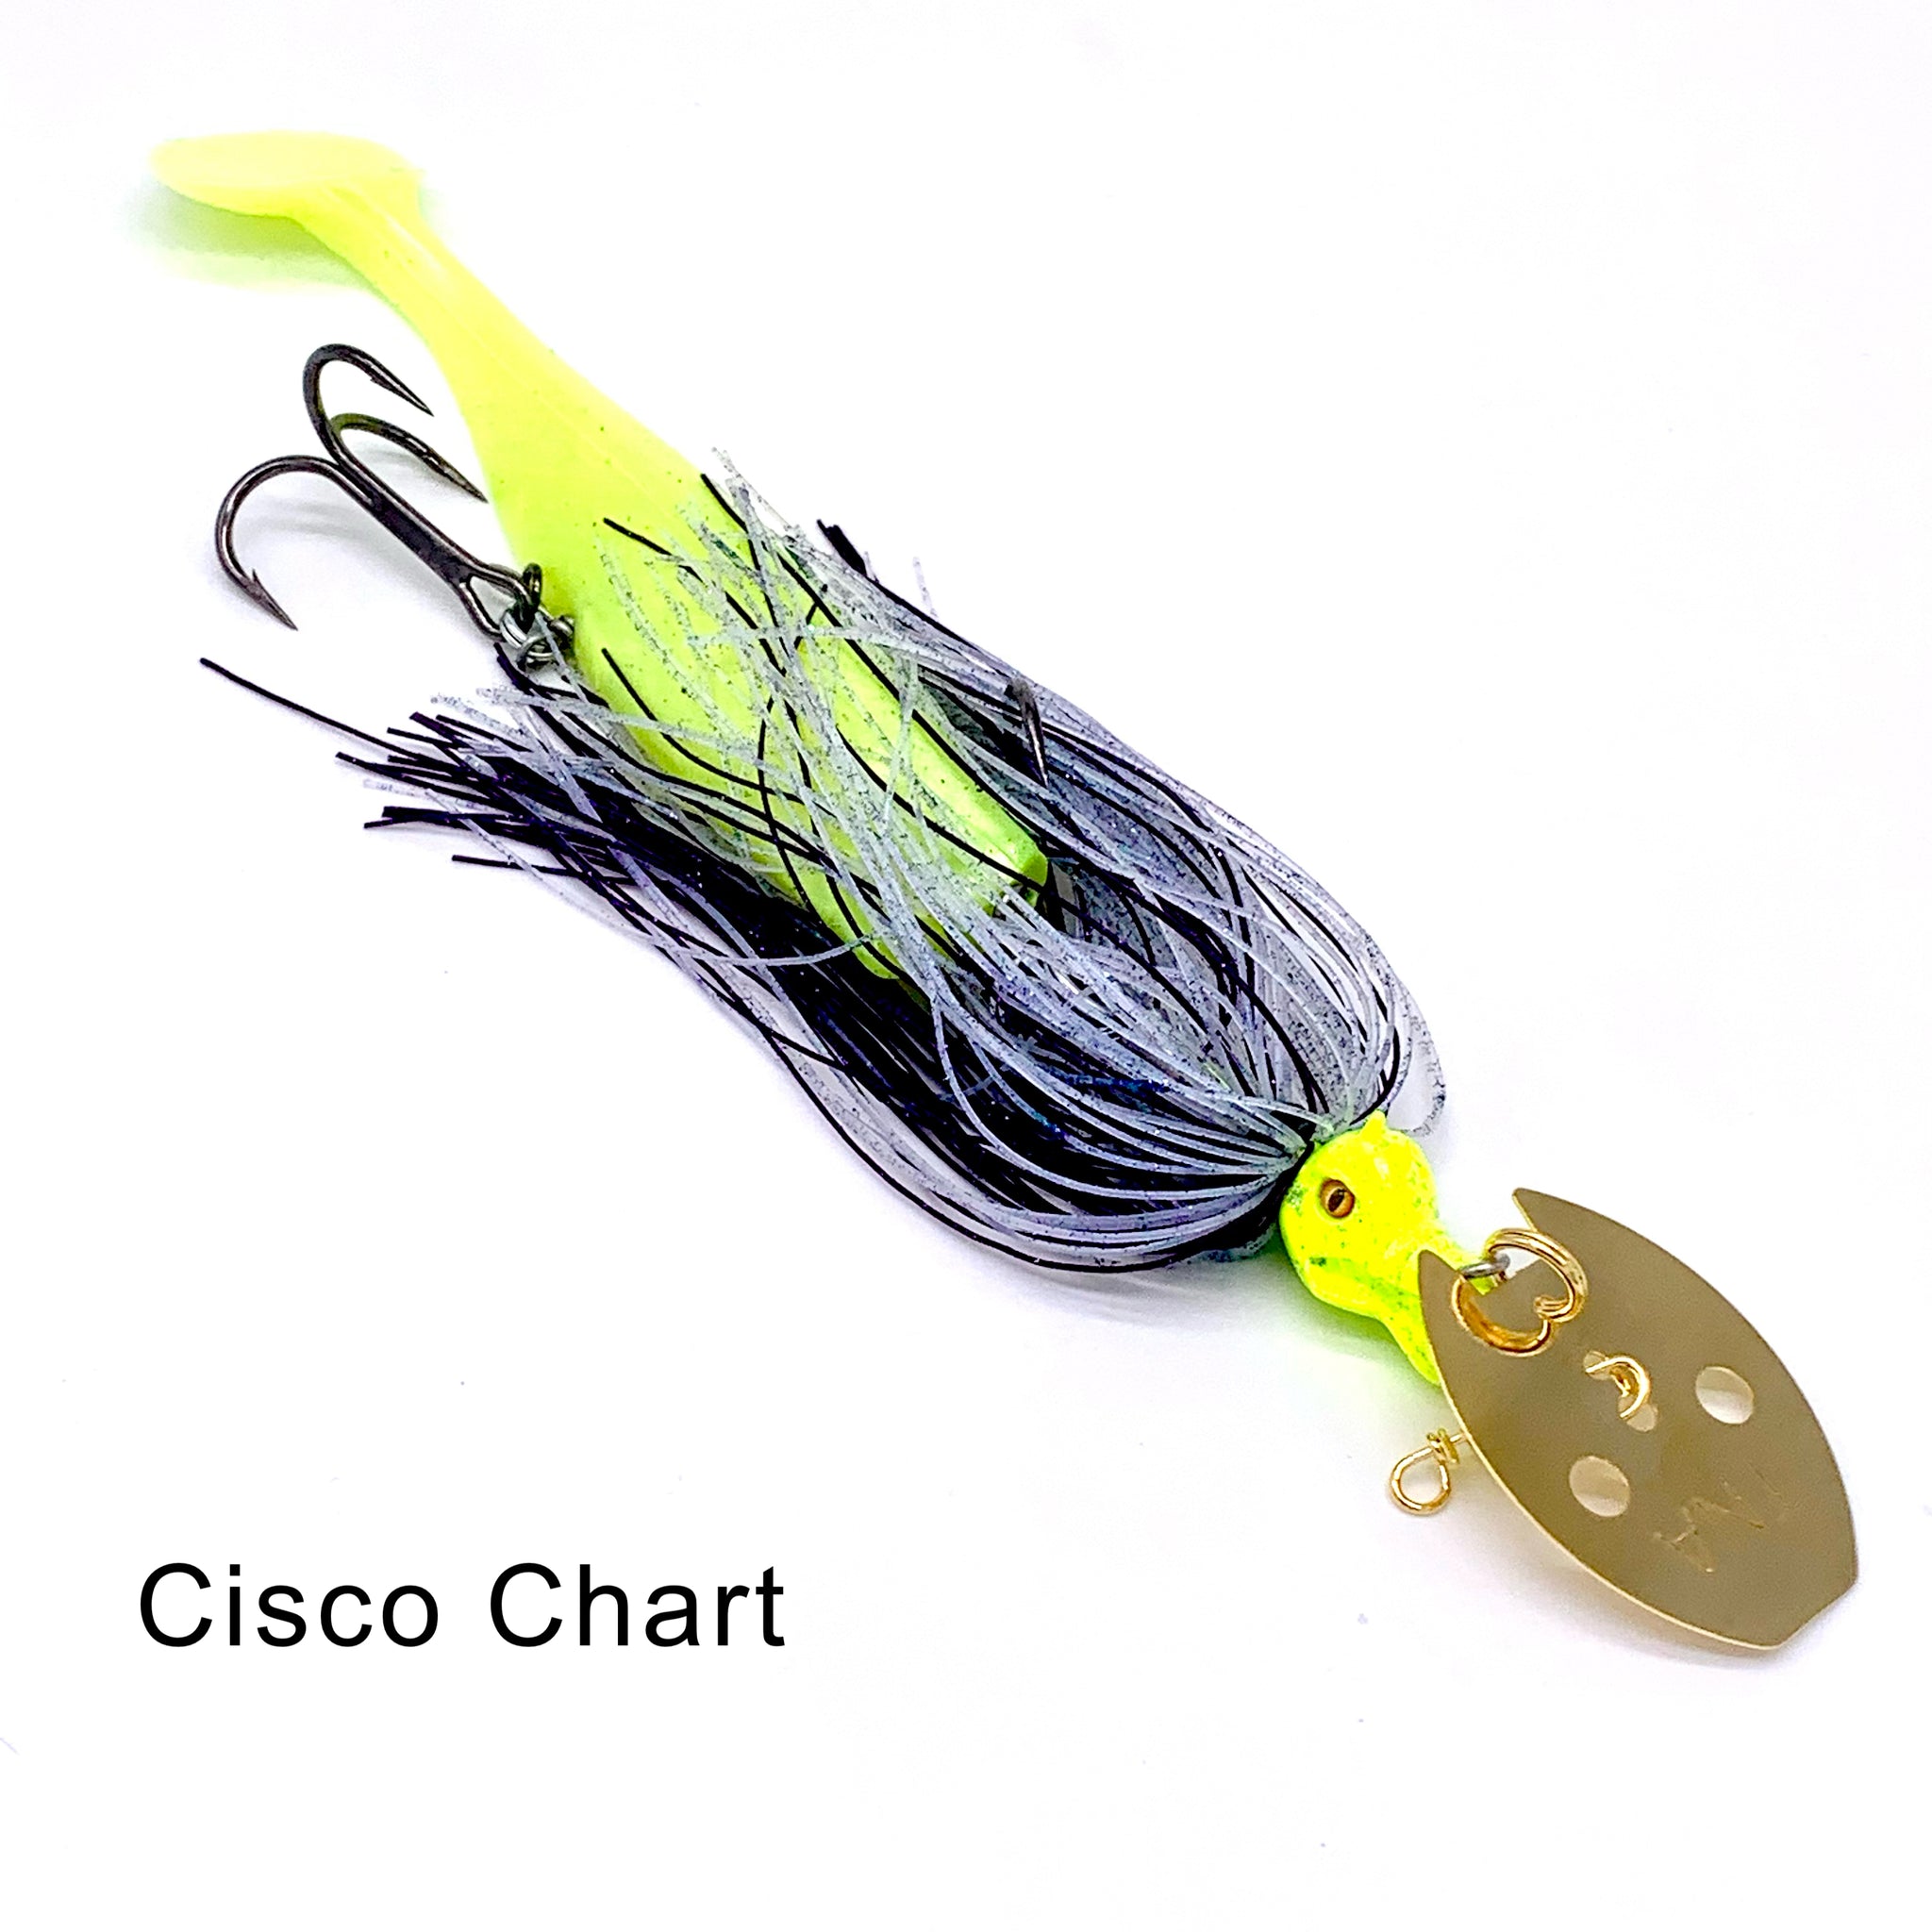 Venom Lures Slingblade GP/Chart Willow Gold 3/8